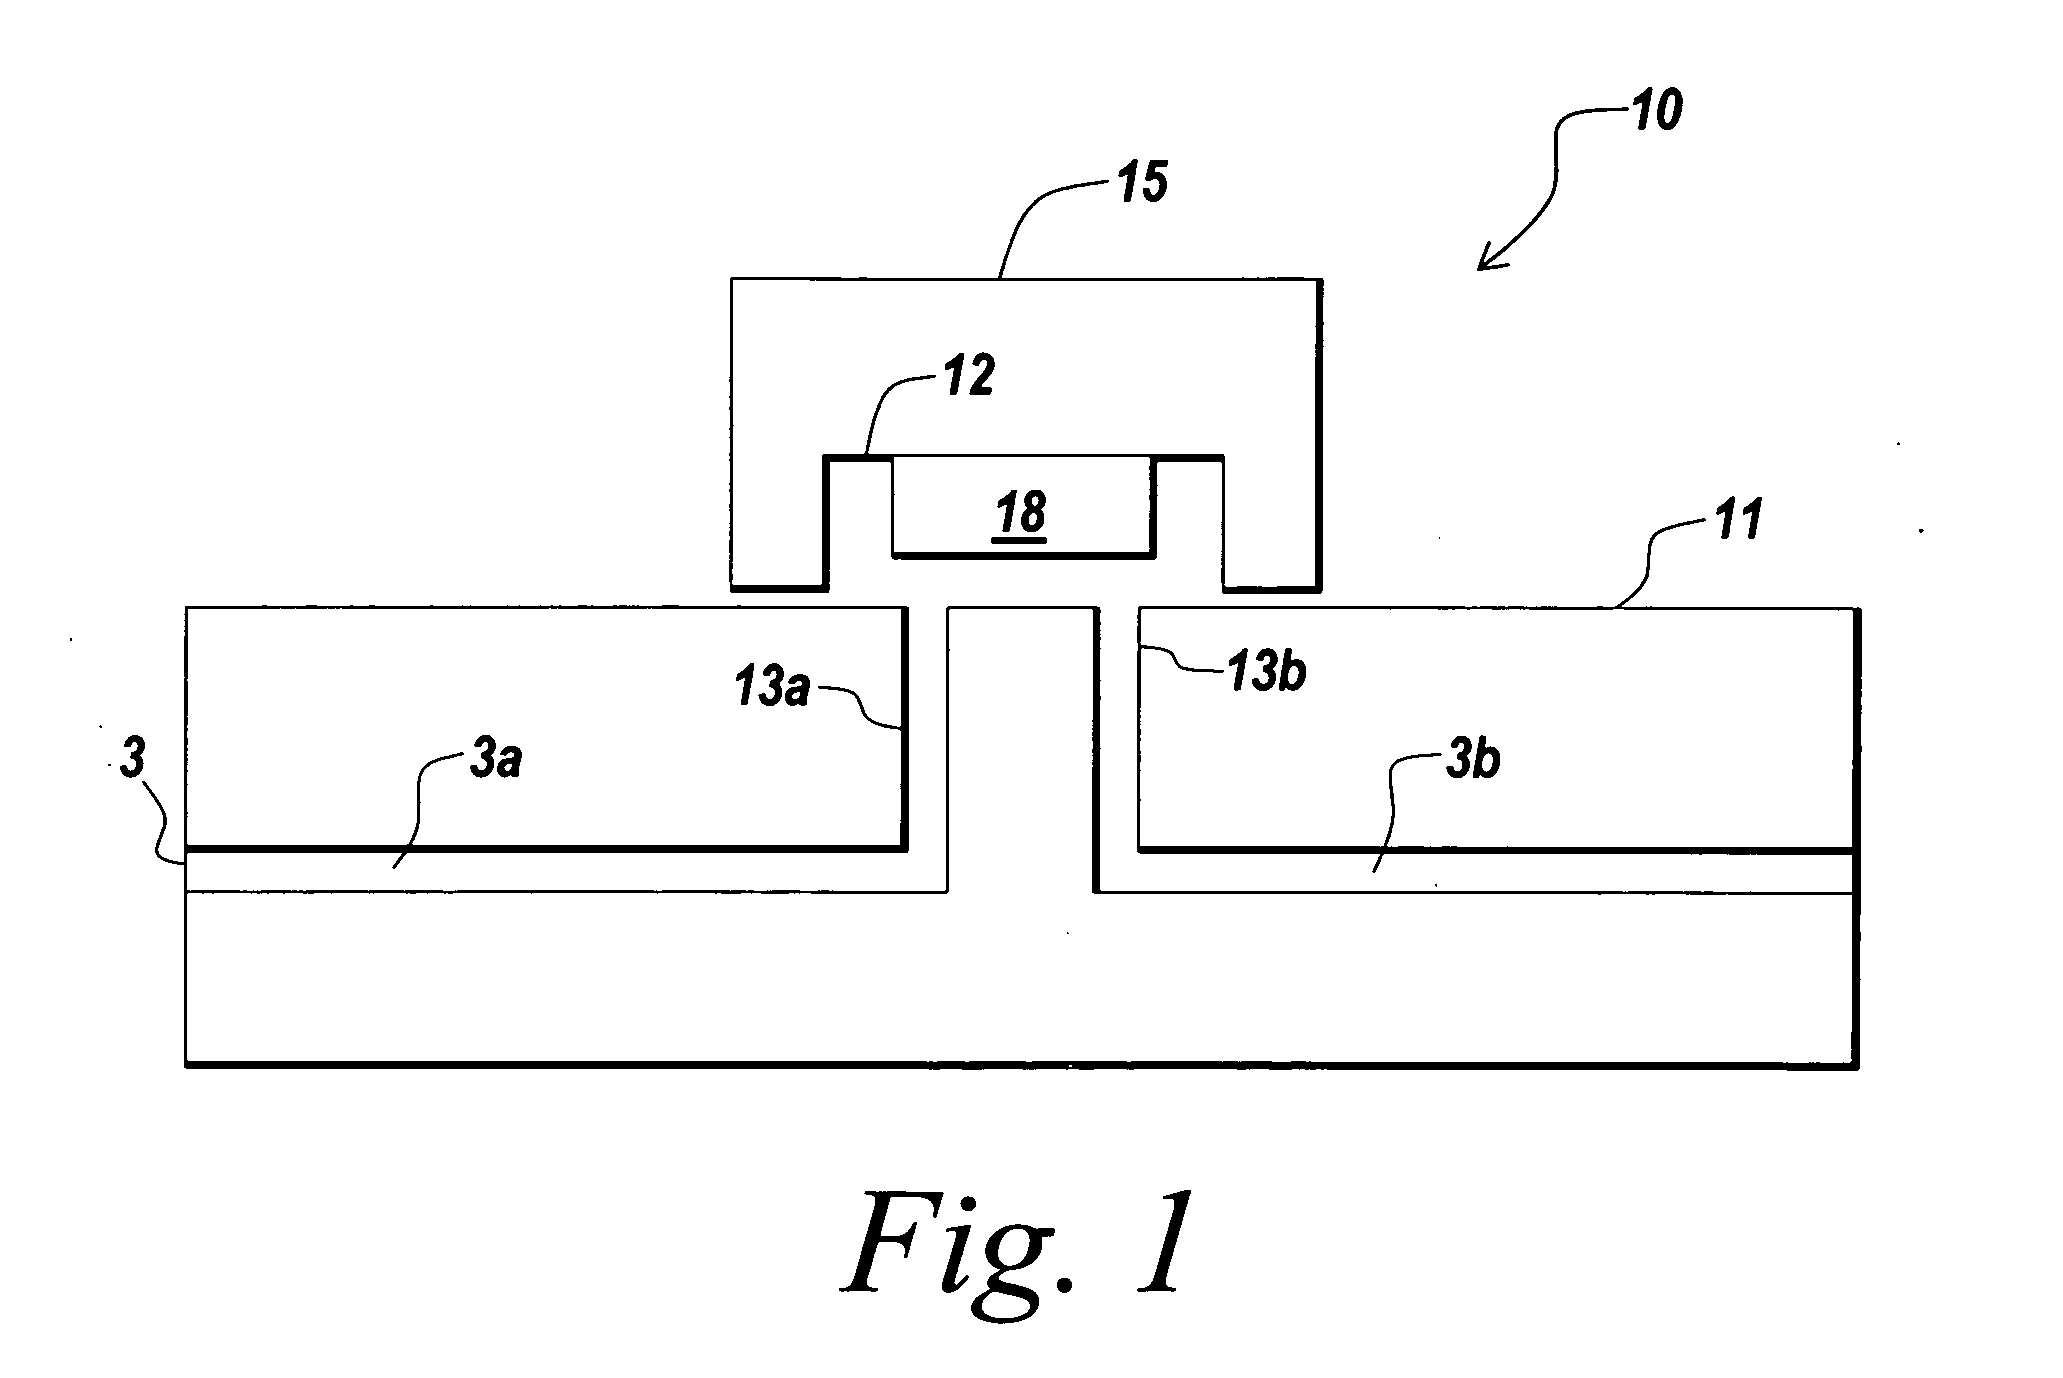 Implementation of microfluidic components, including molecular fractionation devices, in a microfluidic system